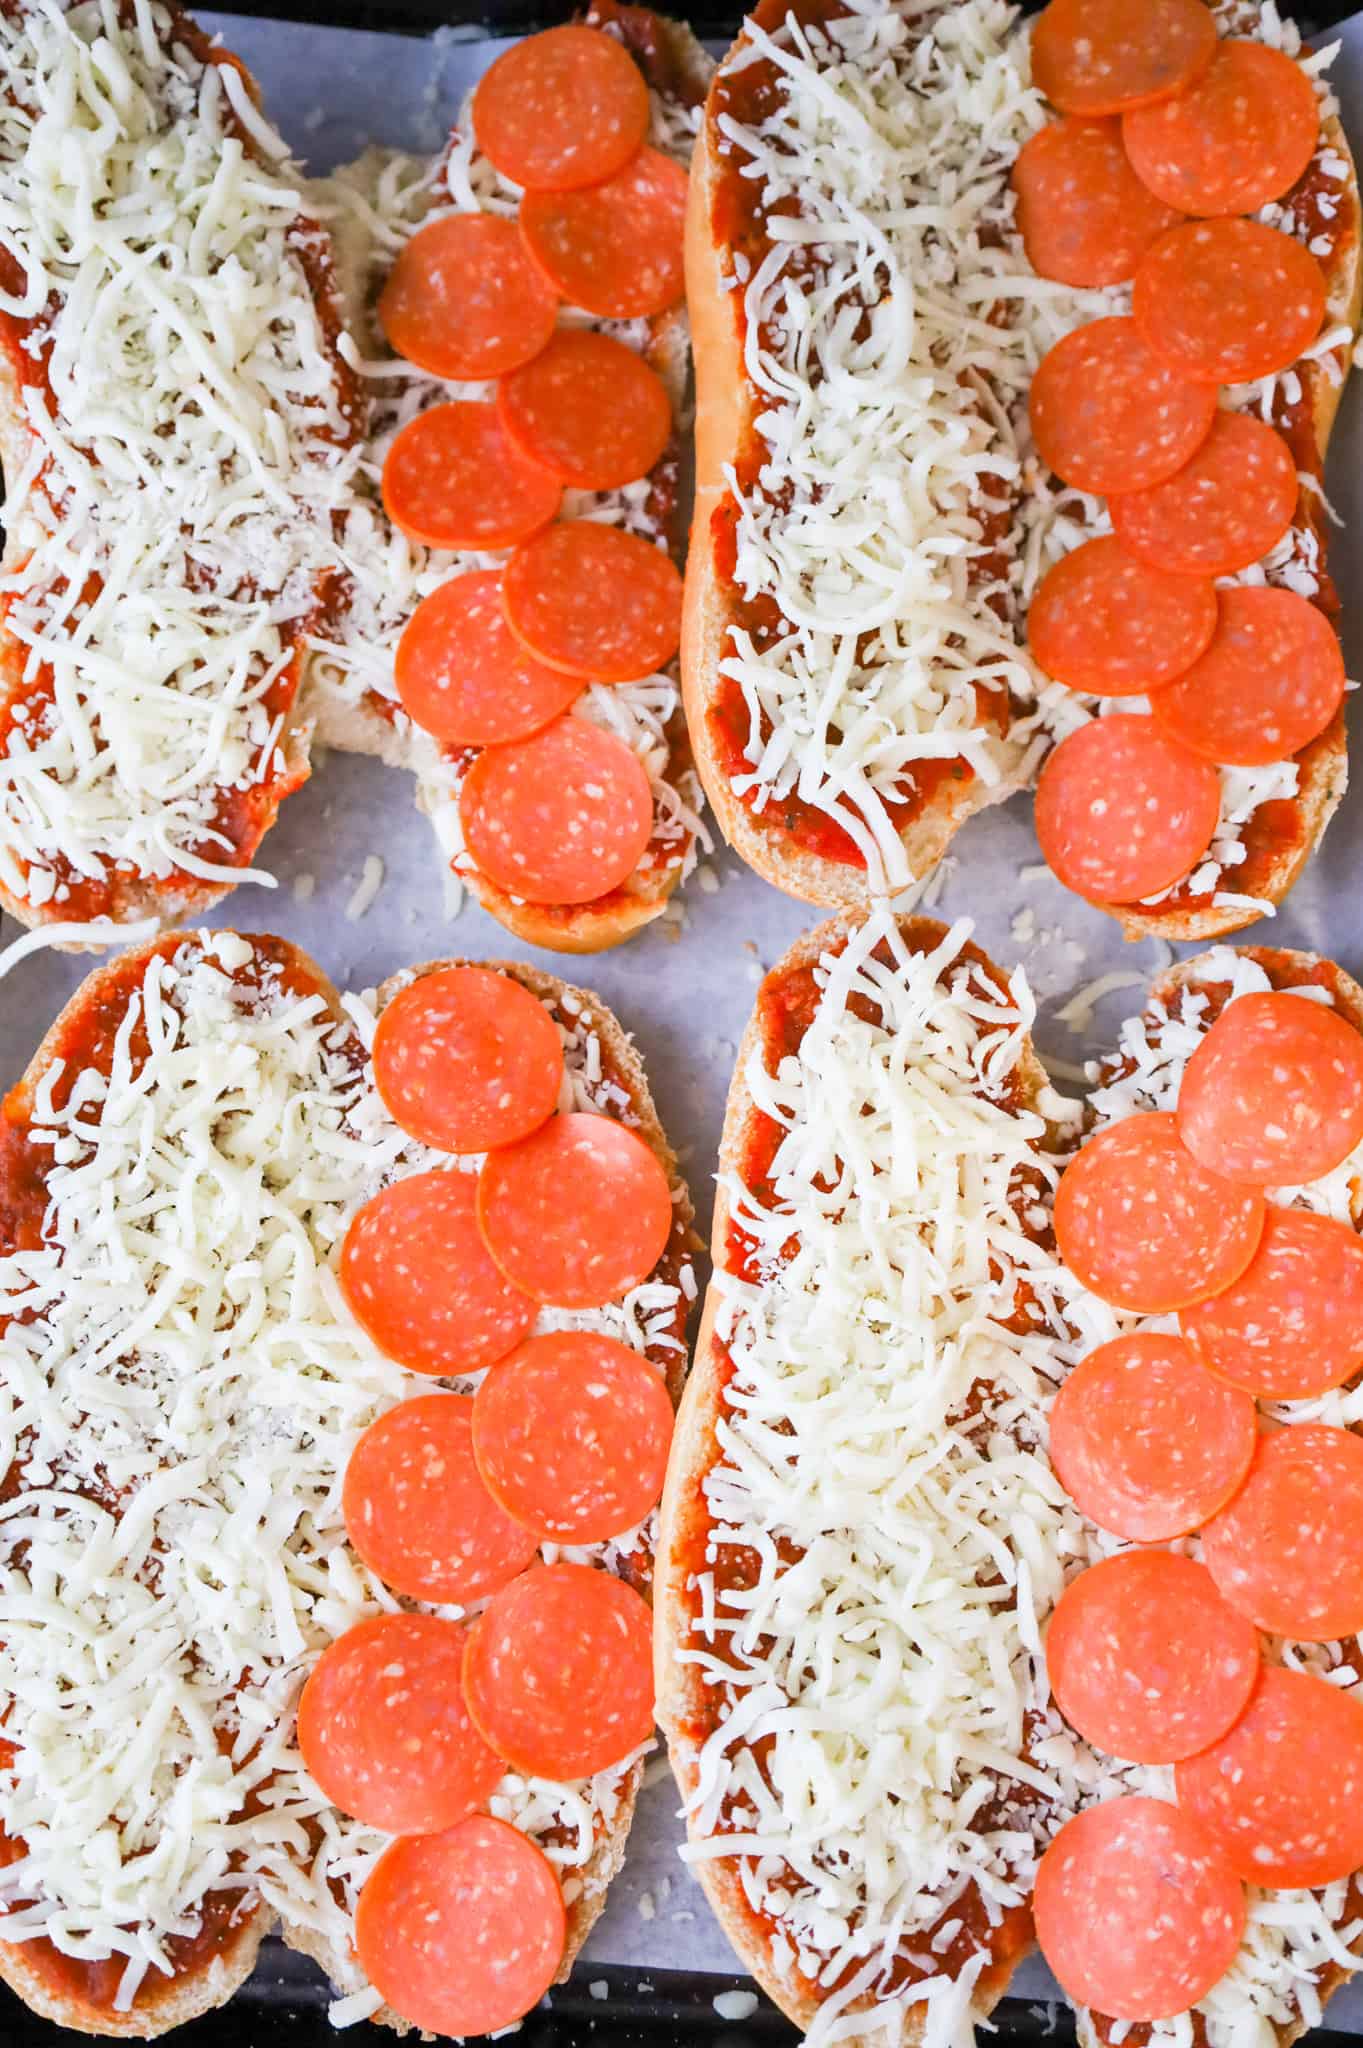 pepperoni slices on top of shredded mozzarella cheese on sub buns on a baking sheet